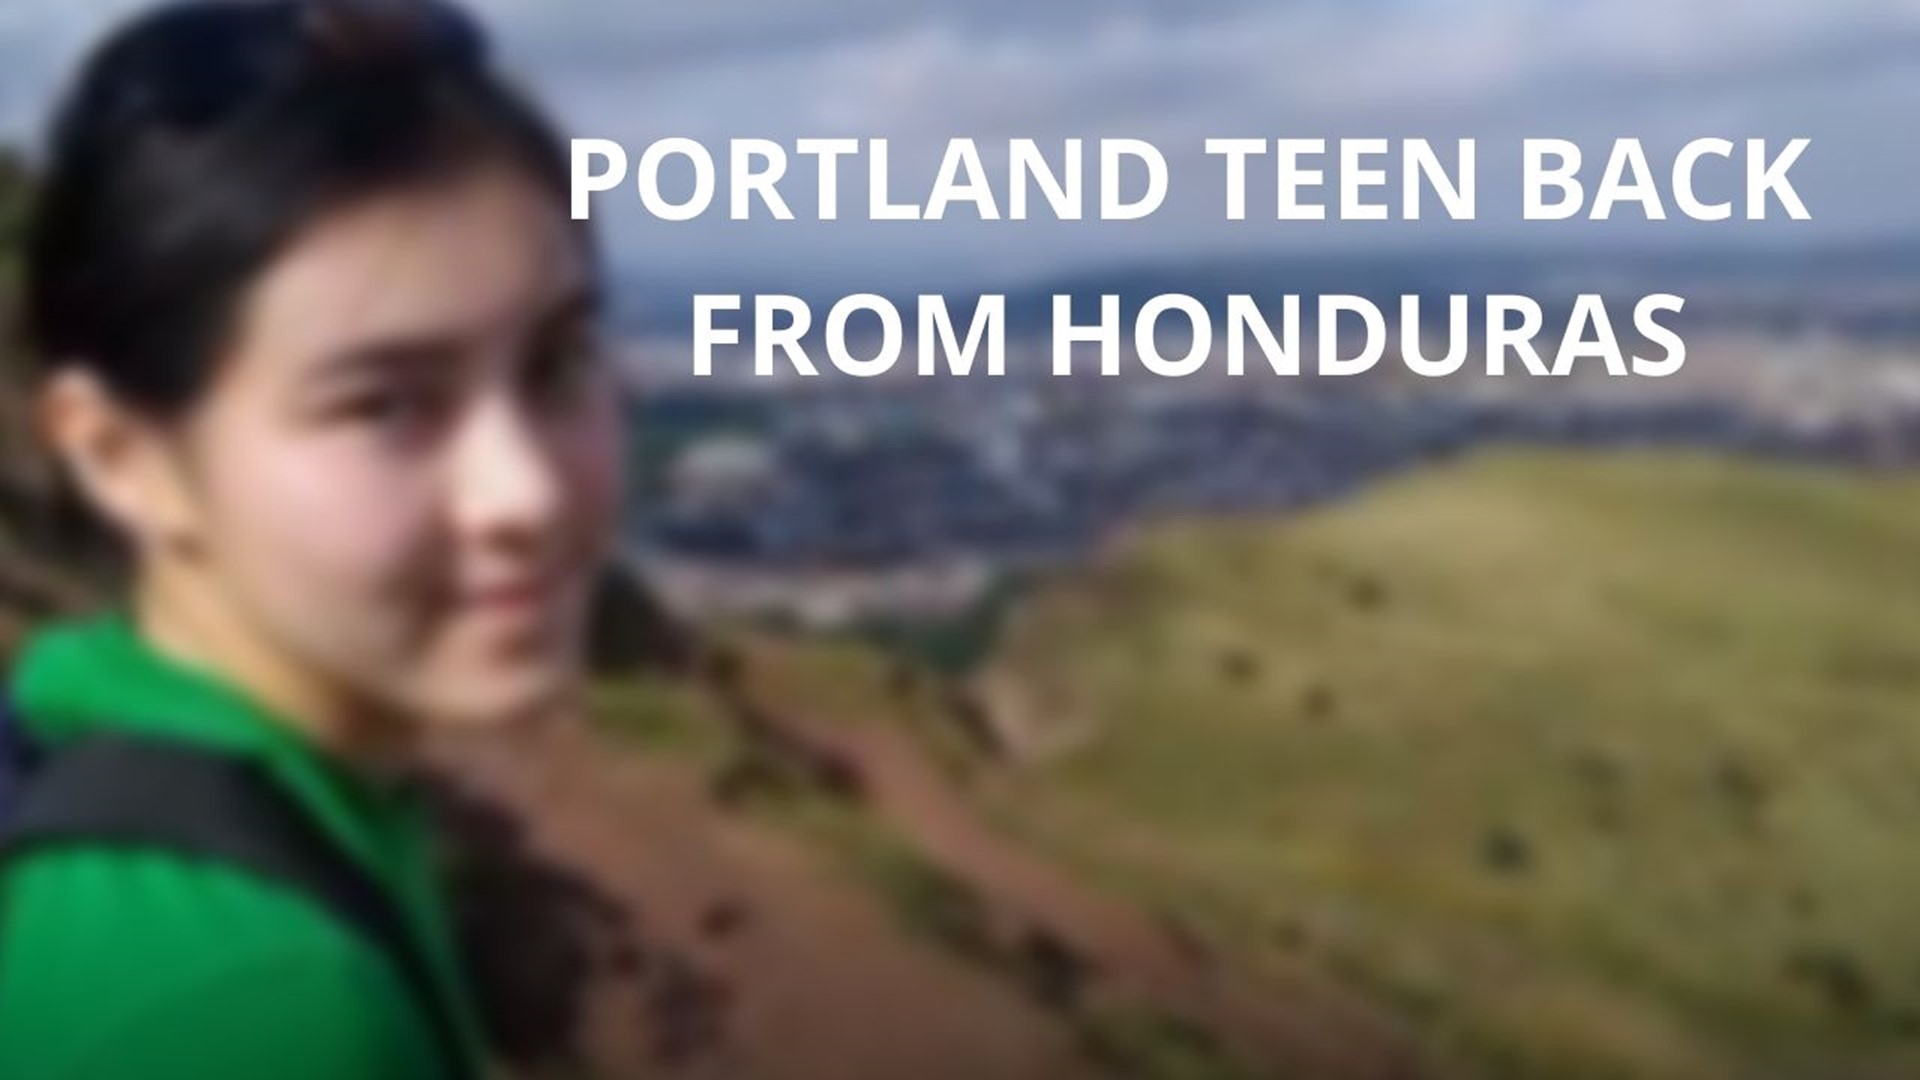 A Portland teen is back home after being stranded in Honduras for over a week